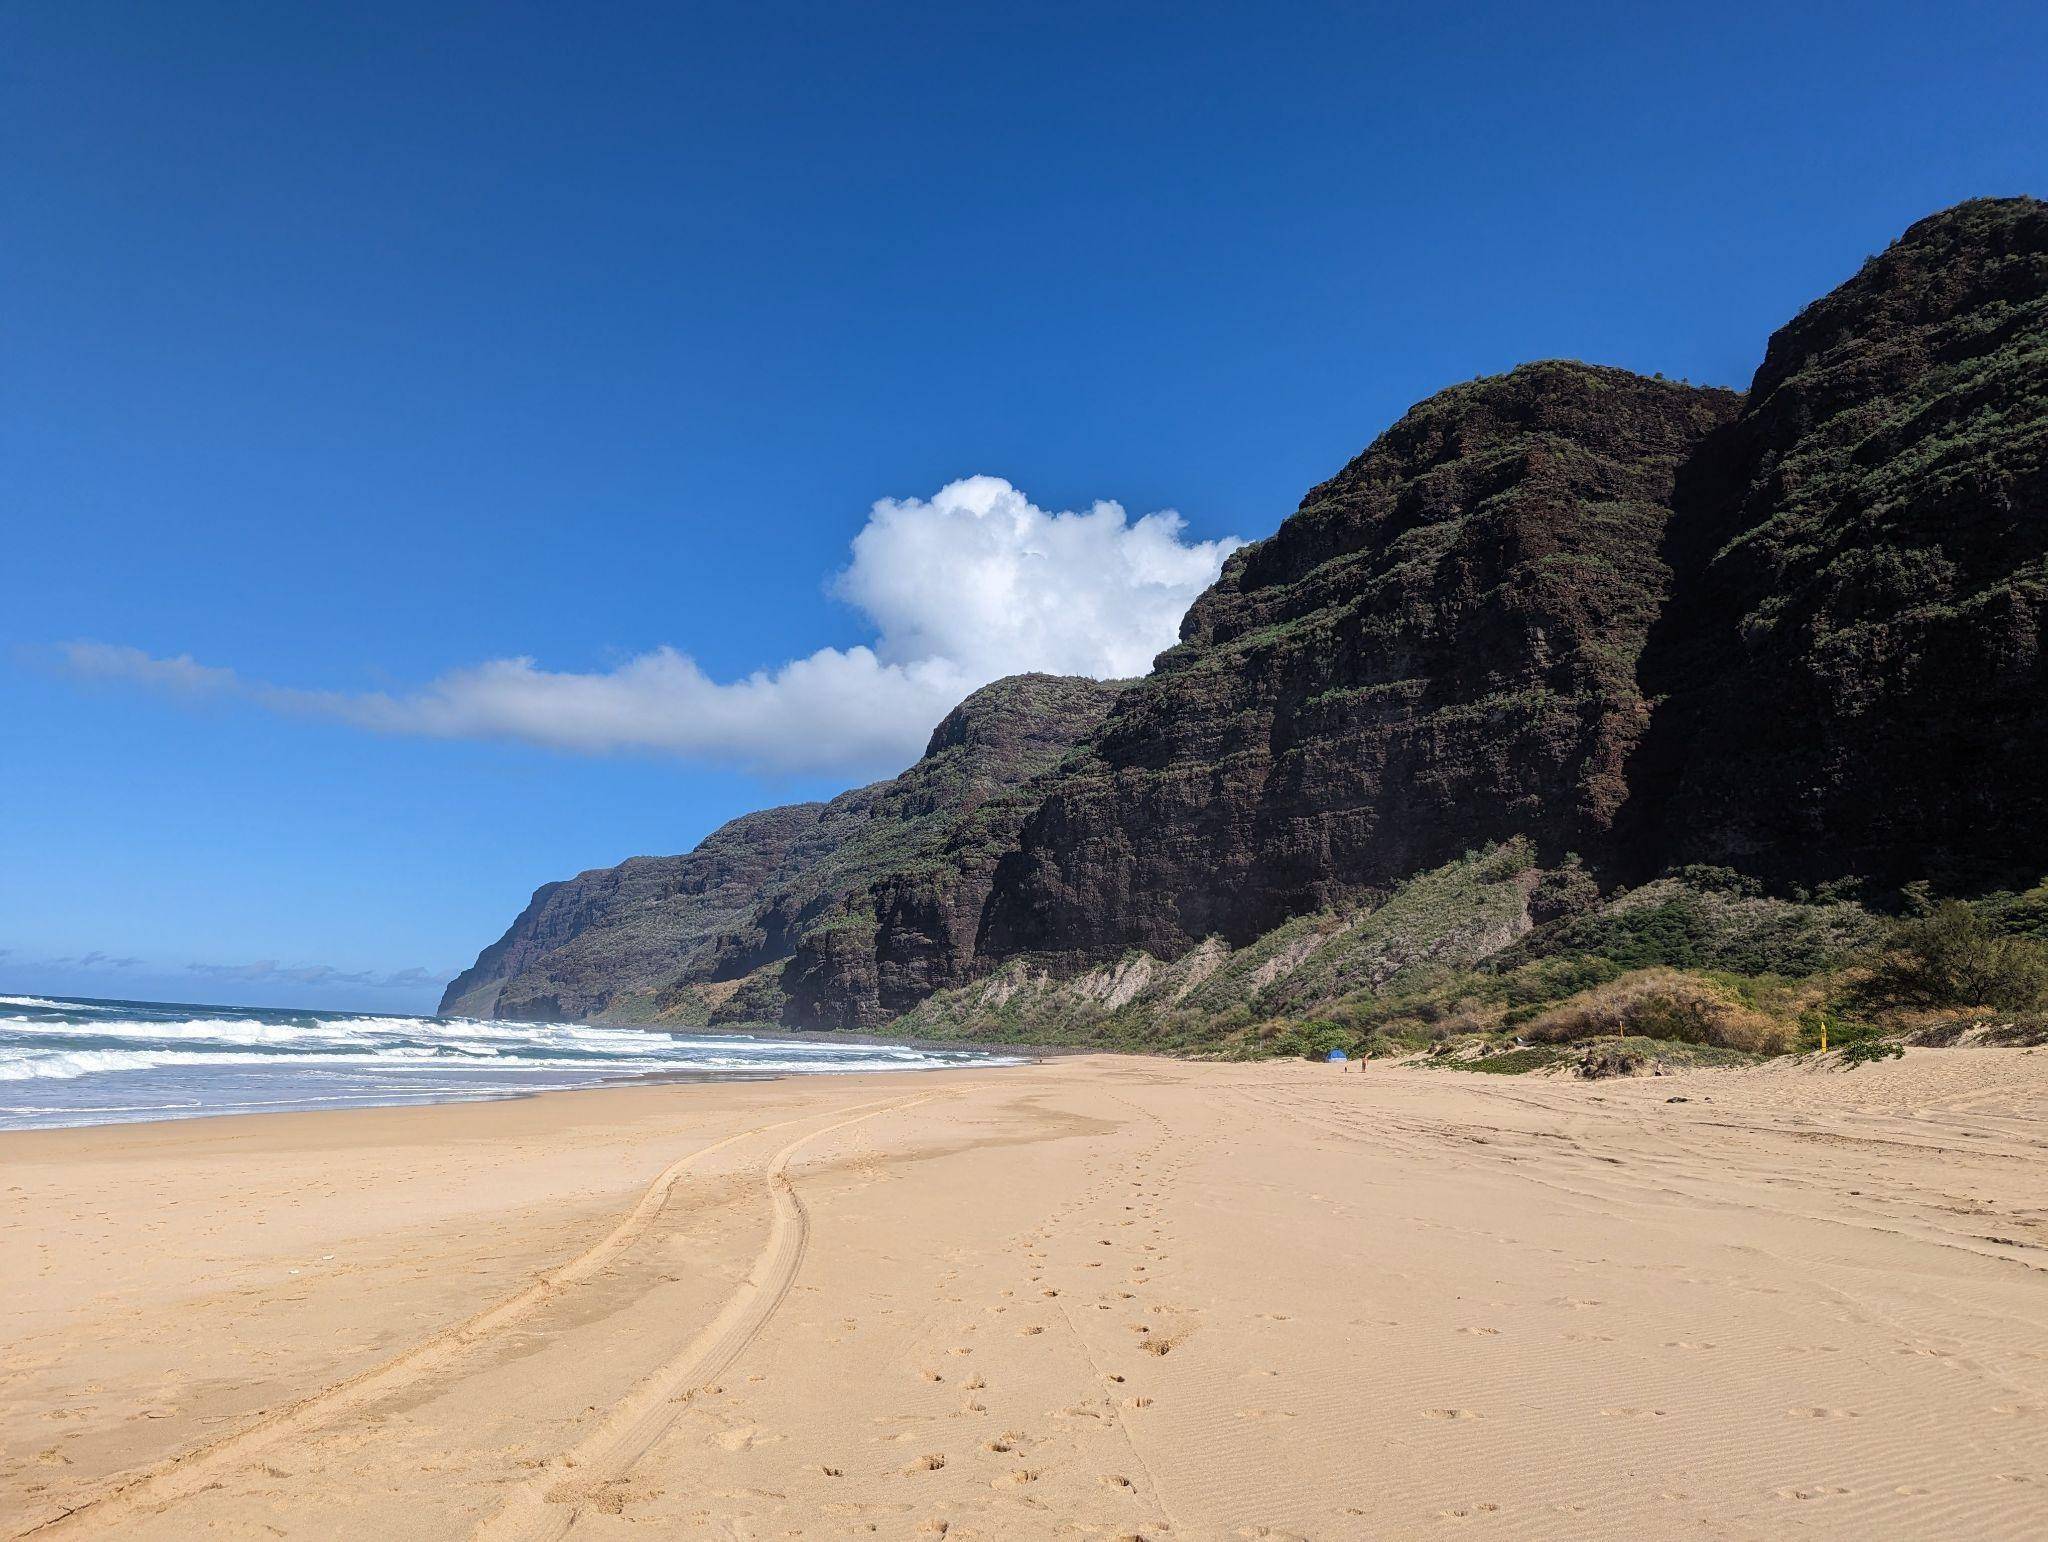 It took a 30 minute drive down a pothole filled dirt road in order to access Polihale beach